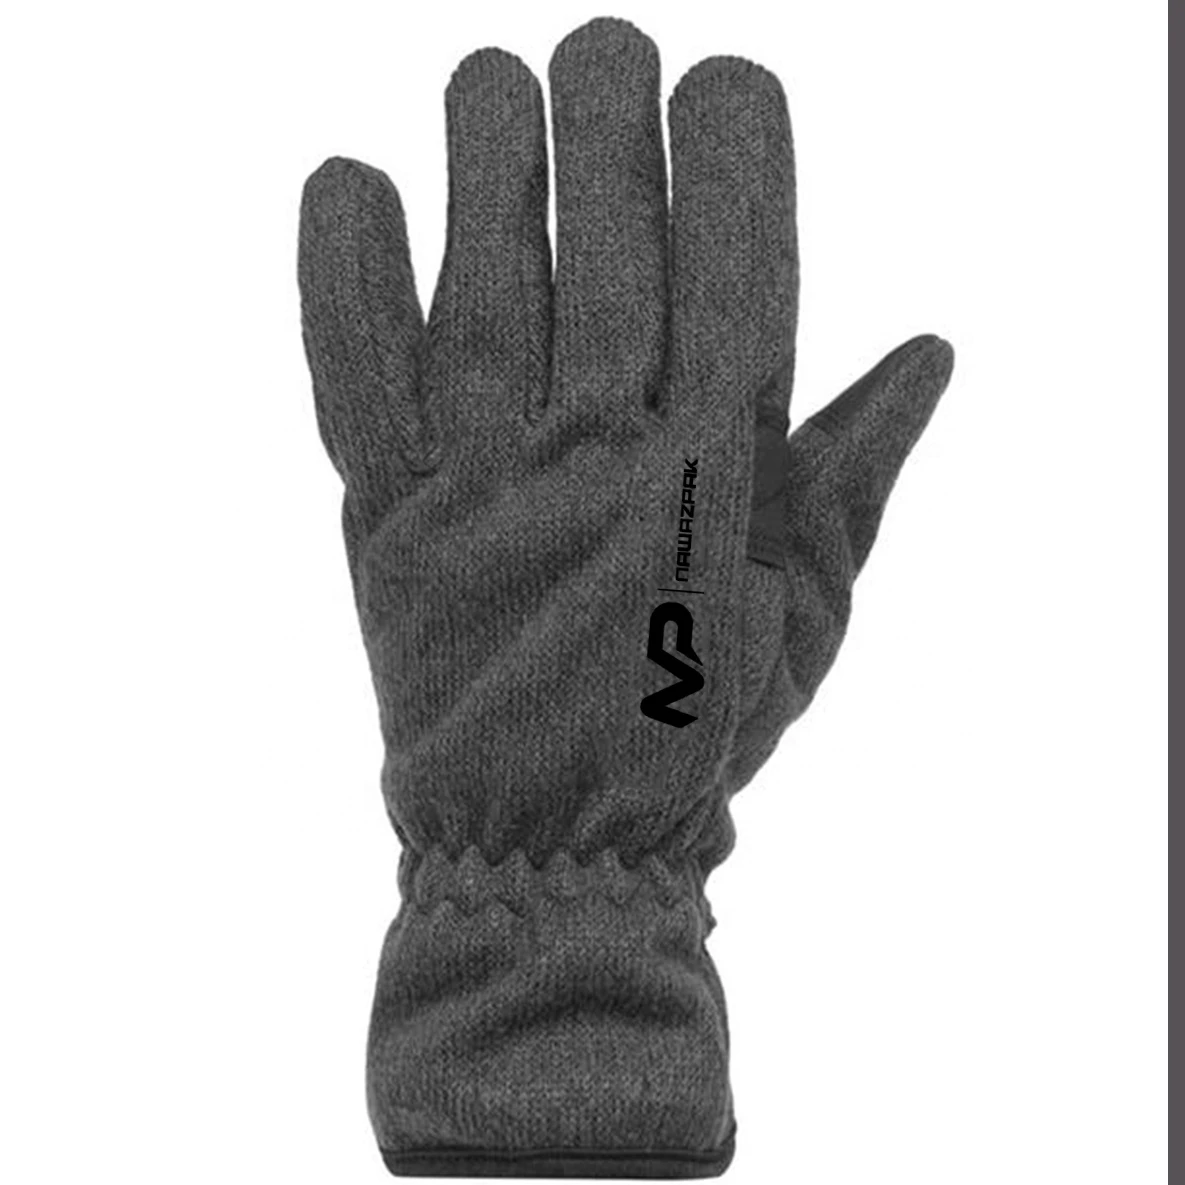 2021 Good quality Waterproof Breathable Winter Snow Skating Gloves Cycling Thickened Warm Ski Gloves